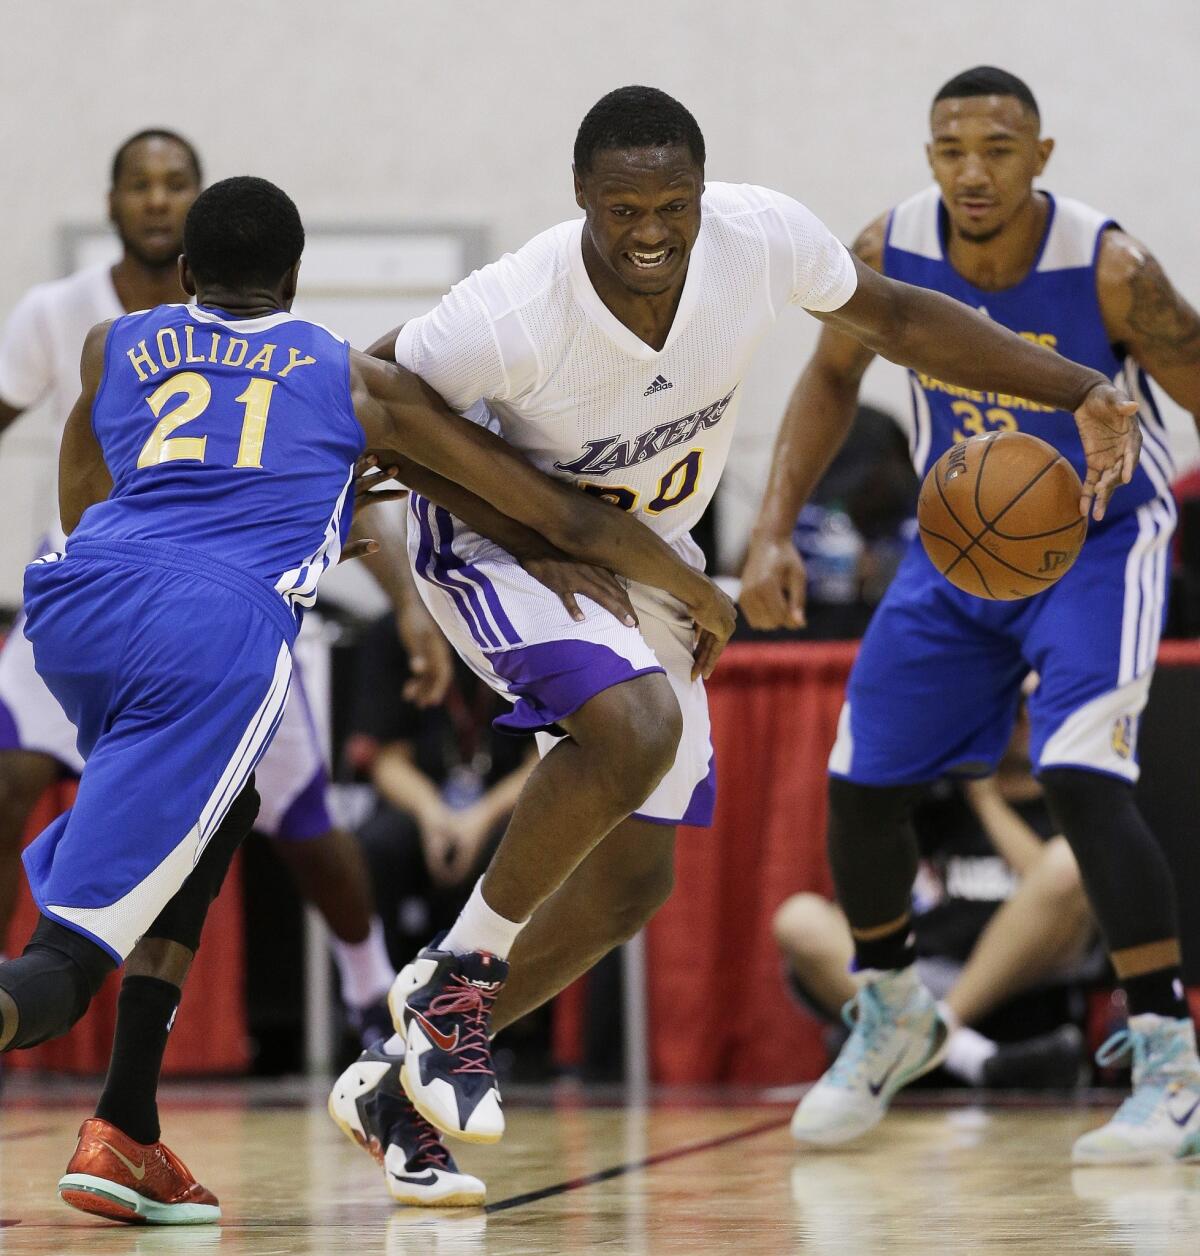 Julius Randle drives up the court against the Golden State Warriors' Justin Holiday during a July 14 NBA summer league game in Las Vegas.